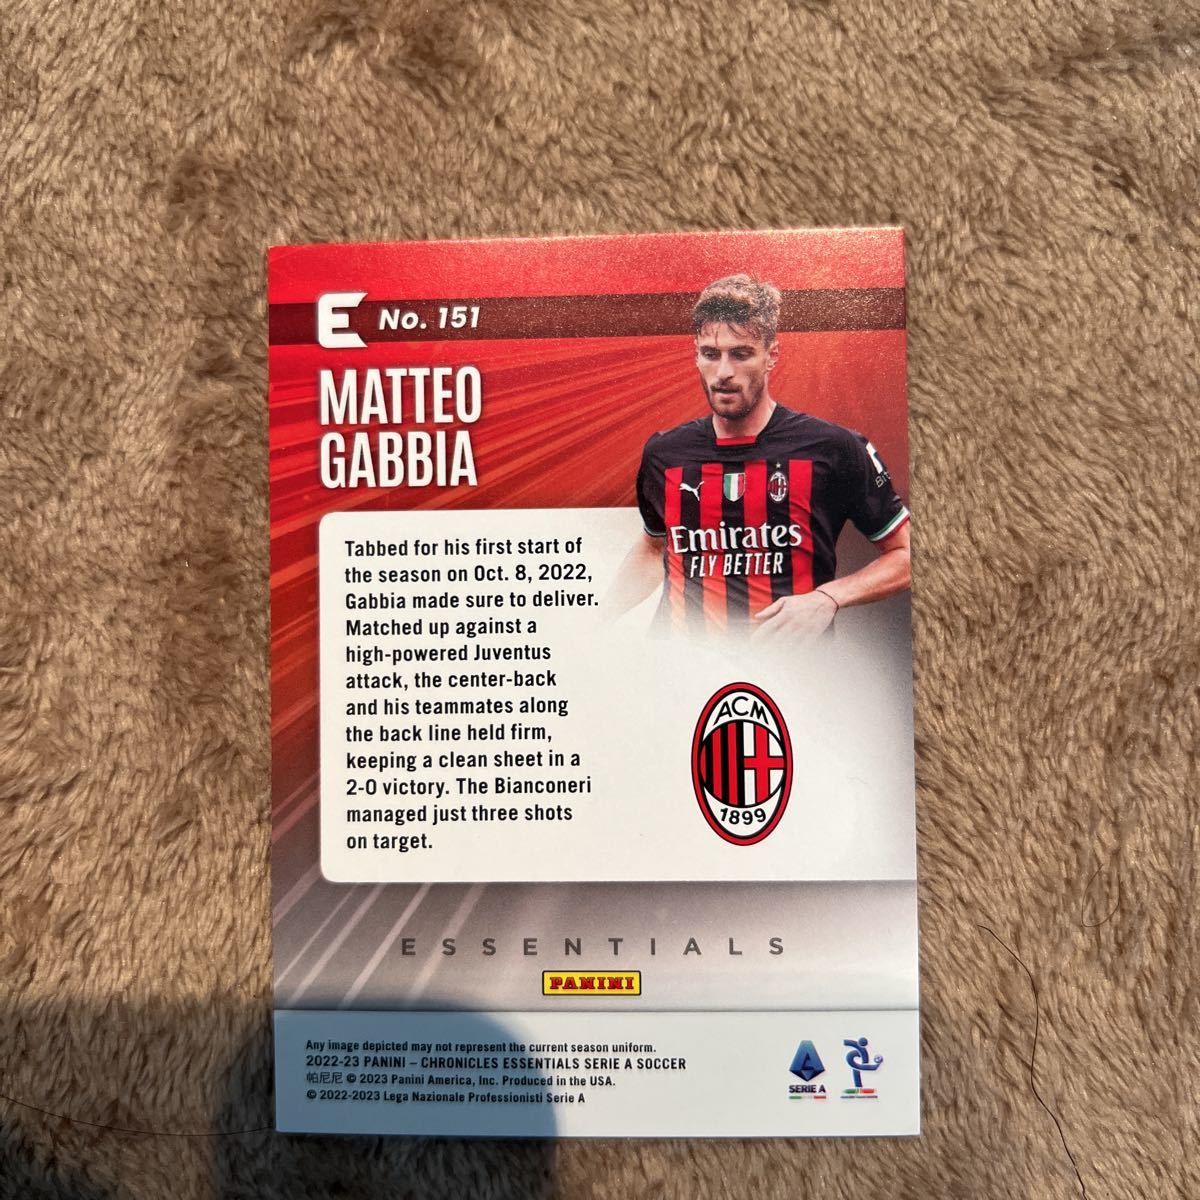 2022-23 Panini Chronicles Soccer Serie A - Matteo Gabbia - Essentials Red 99シリ Color Match - AC Milan ルーキーカード　RC_画像2